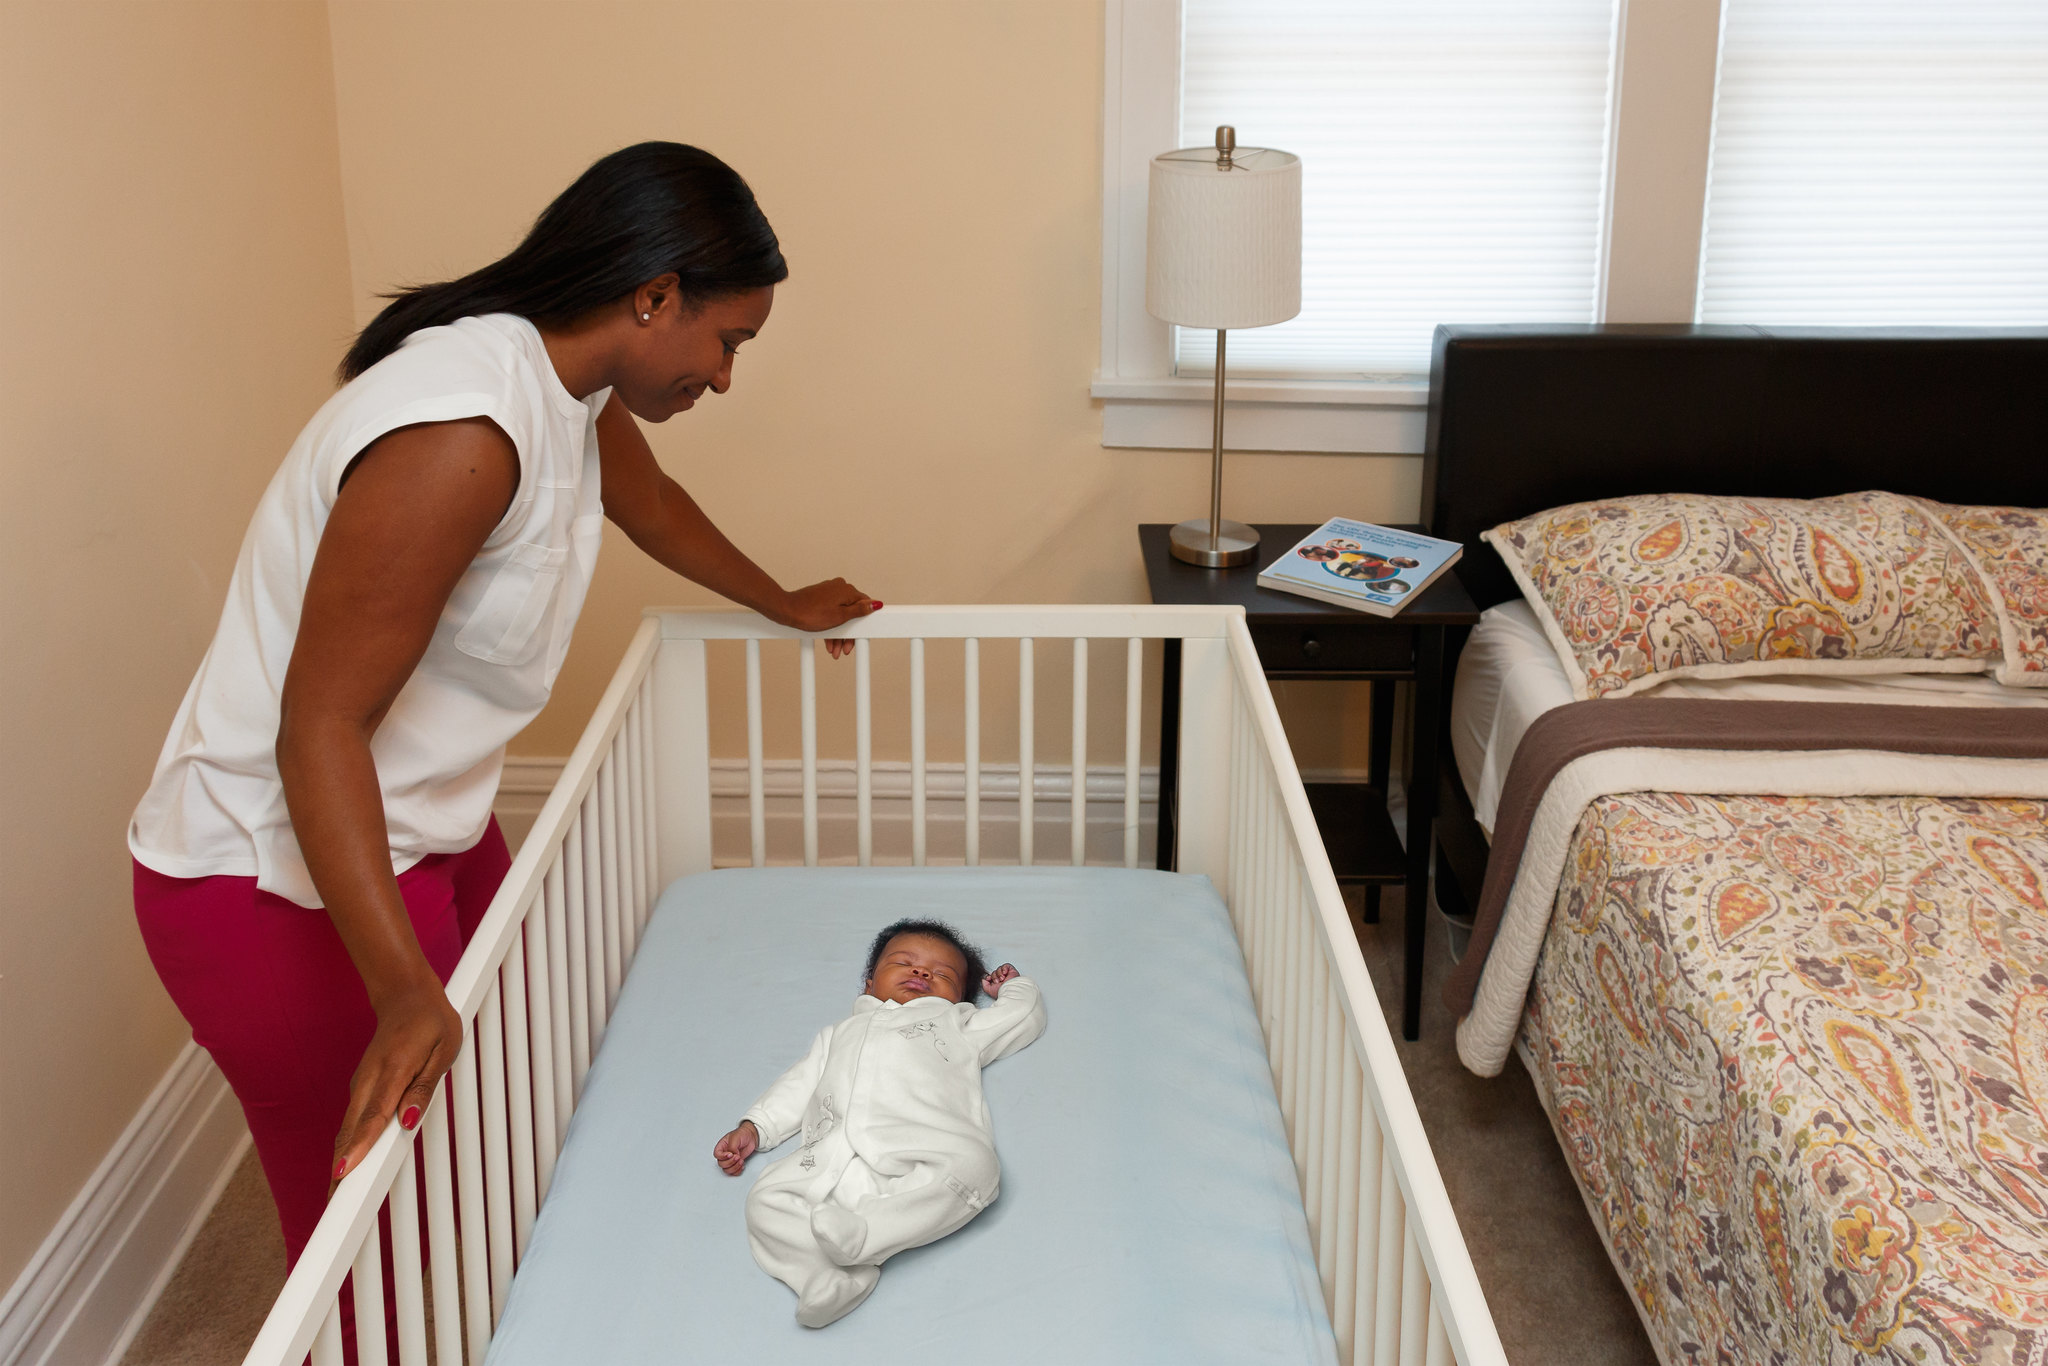 Woman looks over infant sleeping on its back in a crib that does not include soft or loose bedding, crib bumpers, toys, or other objects in the sleep area. 